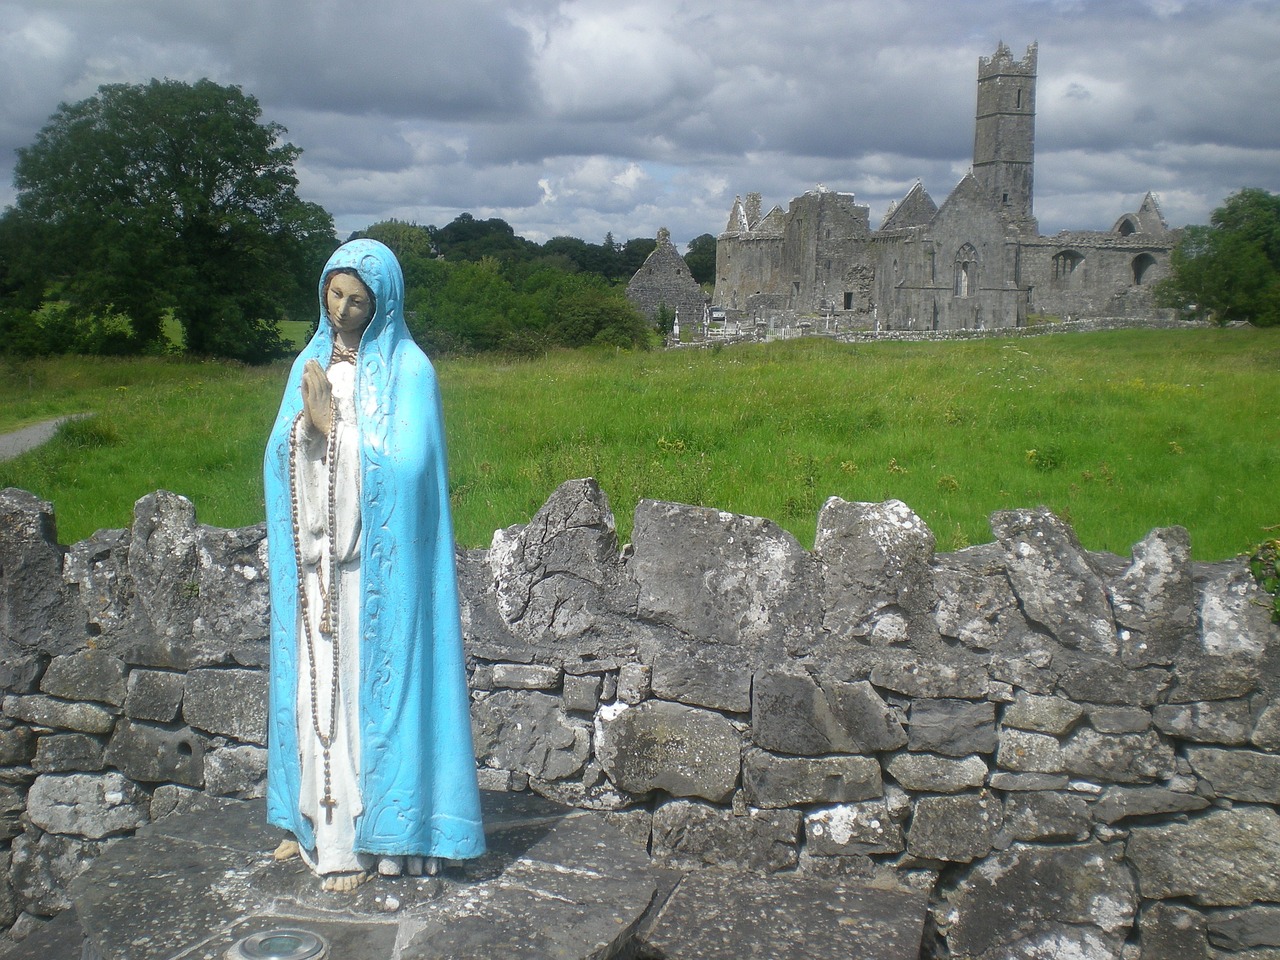 a statue of a person wearing a blue robe, a statue, by Edward Corbett, flickr, old abbey in the background, virgin mary, mayo, mother theresa